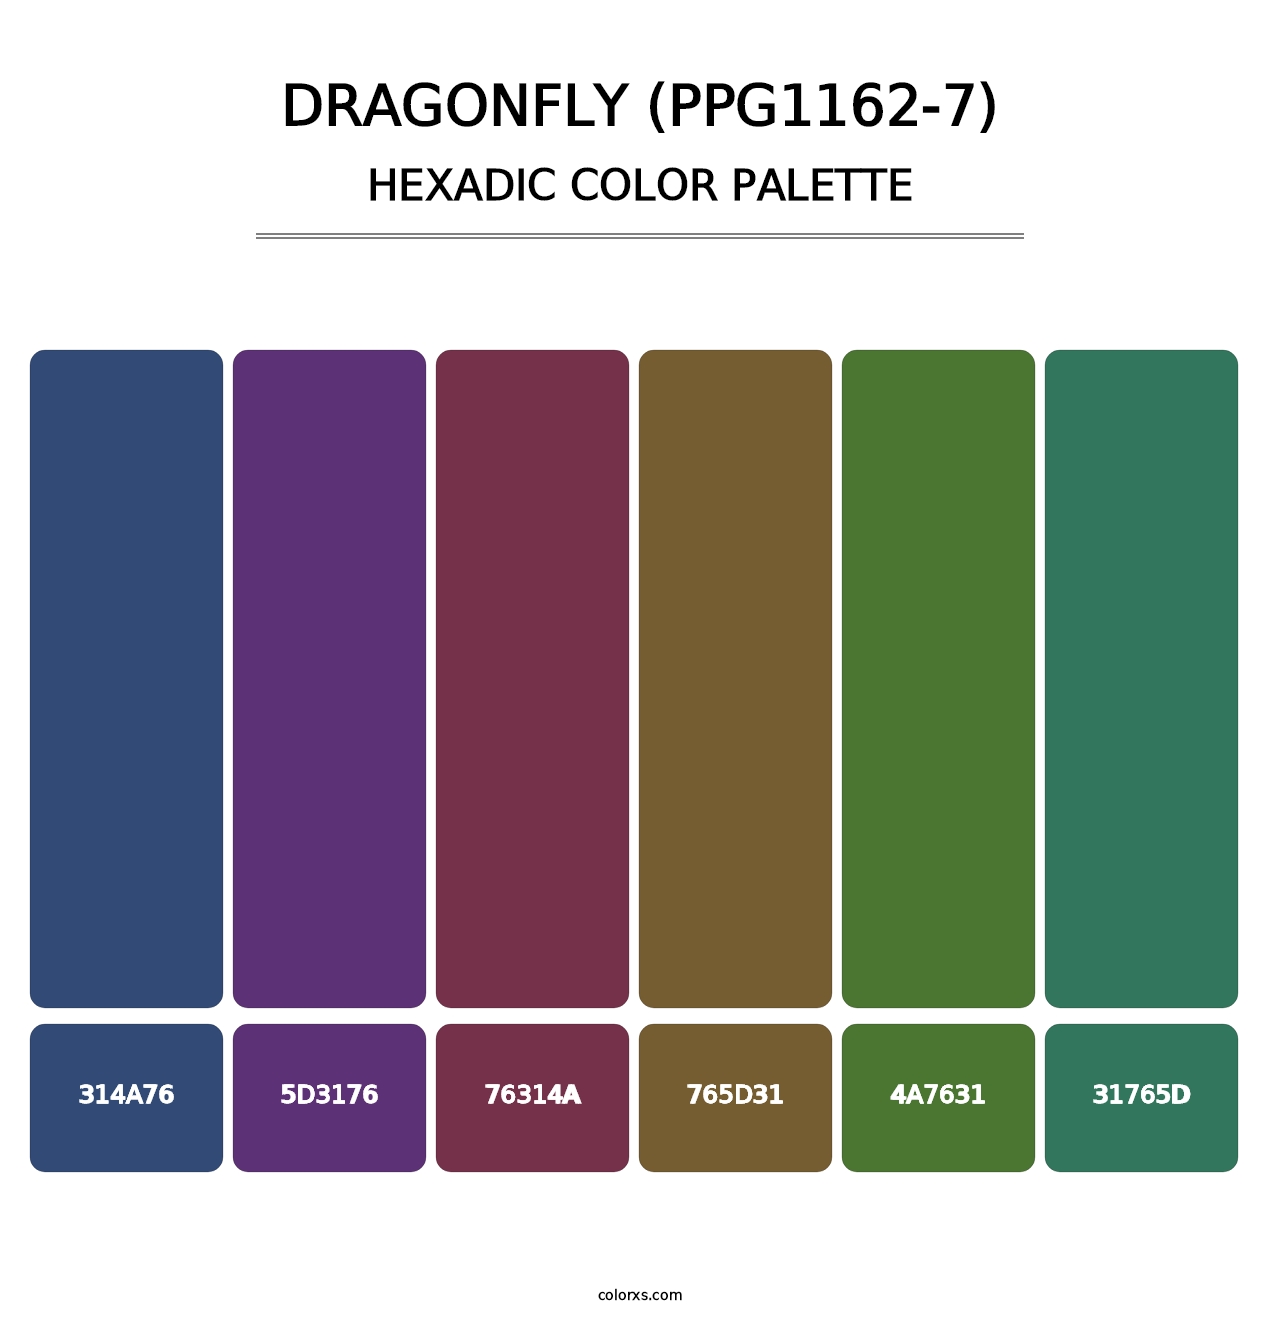 Dragonfly (PPG1162-7) - Hexadic Color Palette